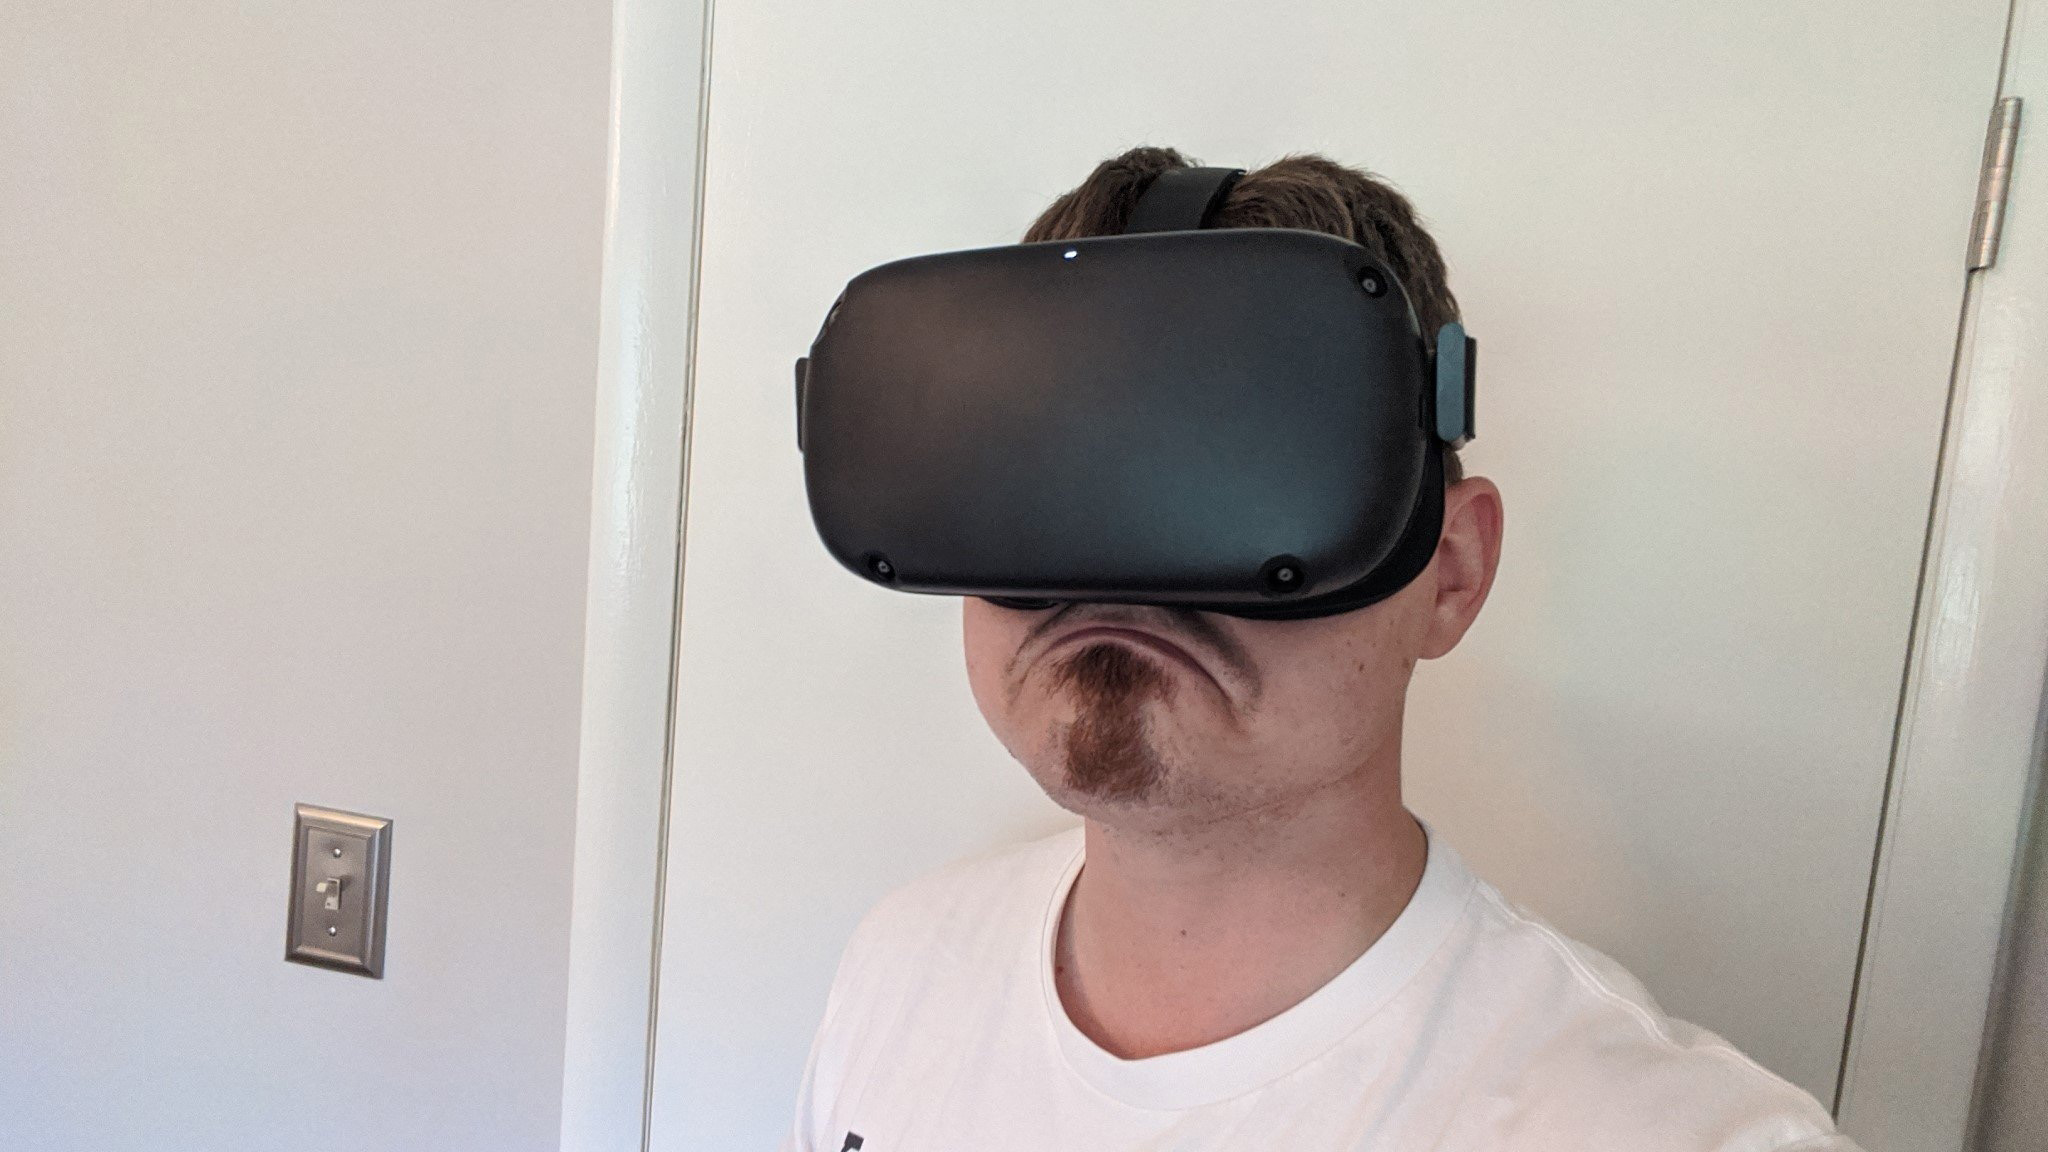 Making a sad face while wearing the Oculus Quest